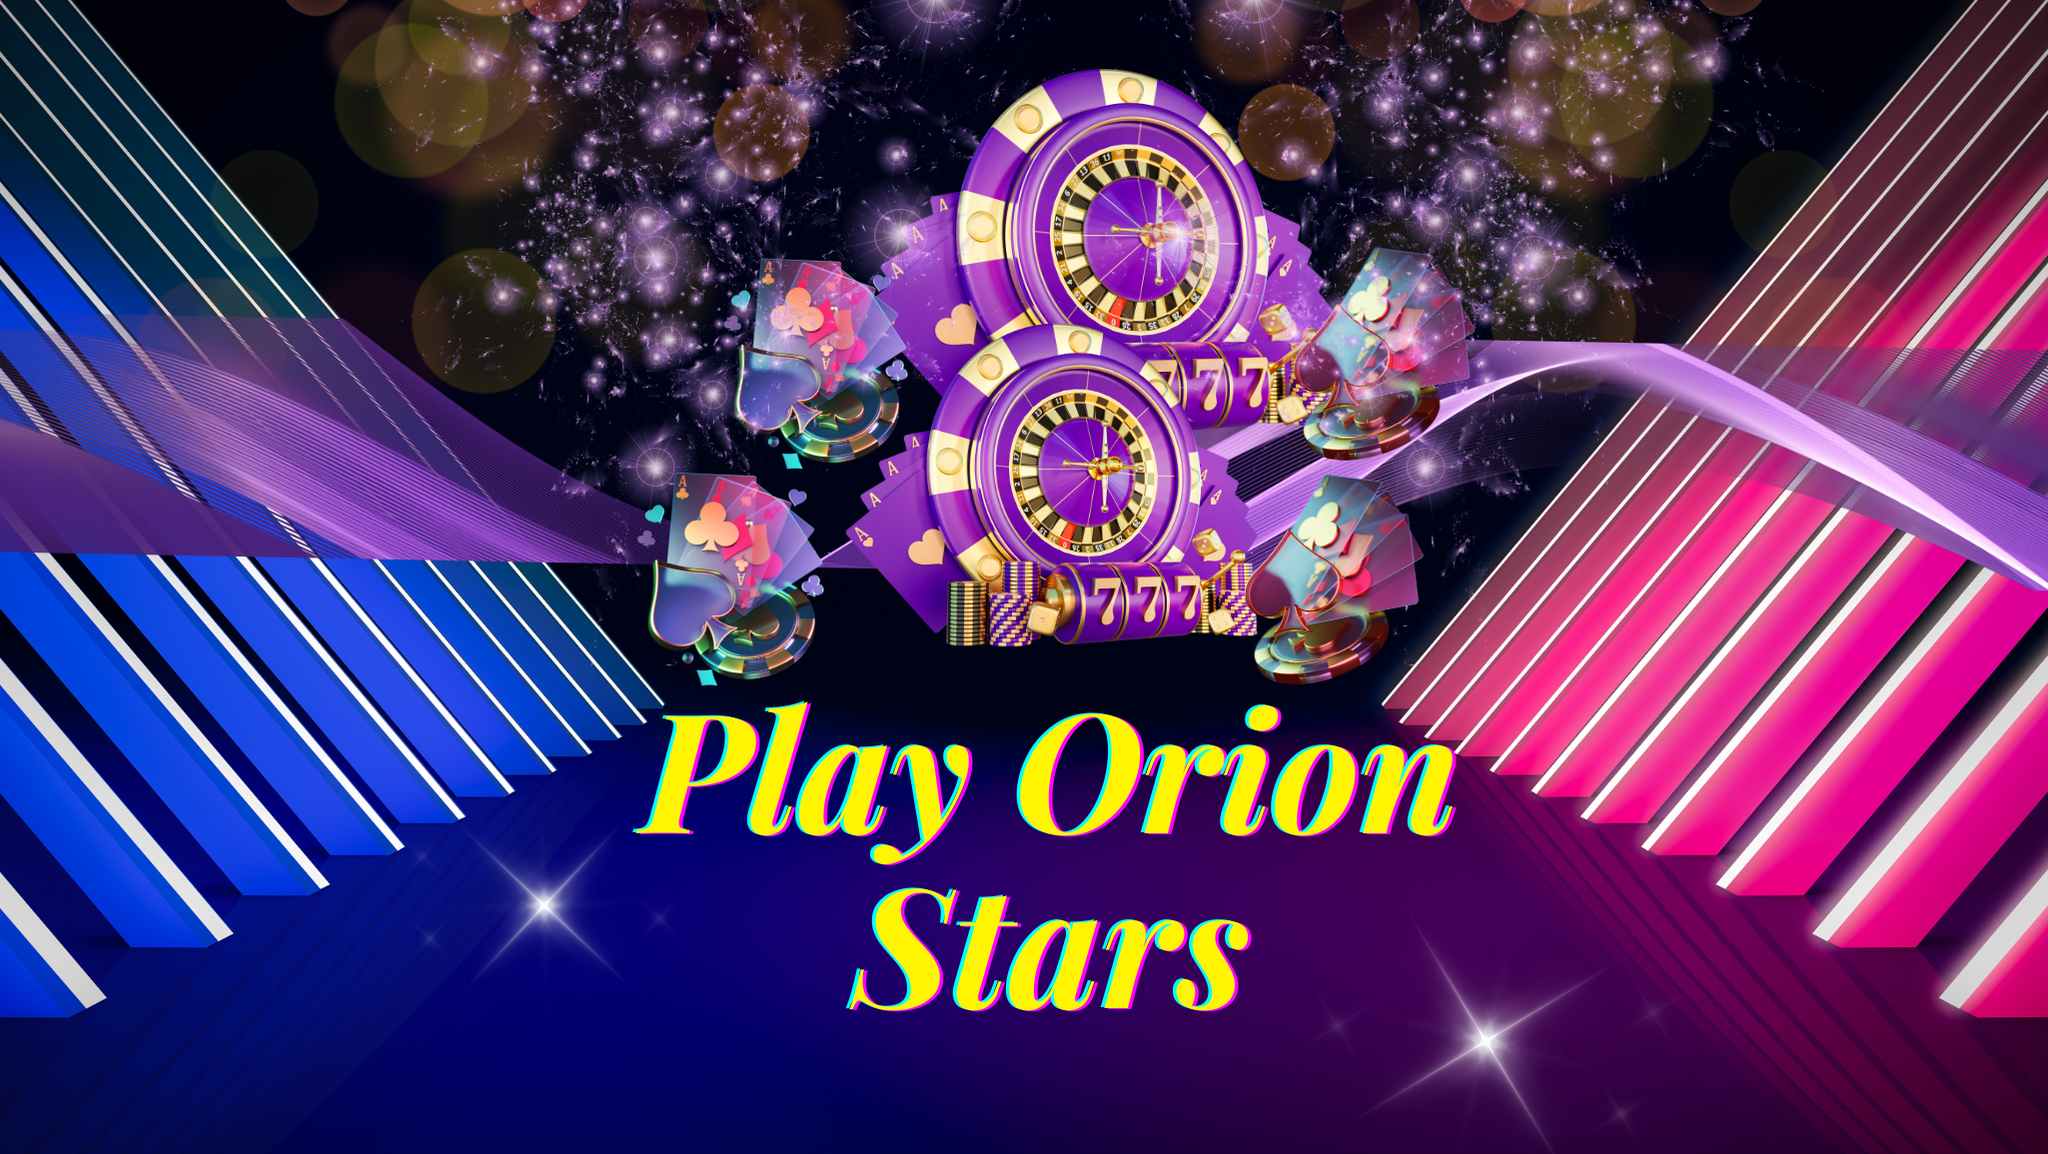 Play orion stars game